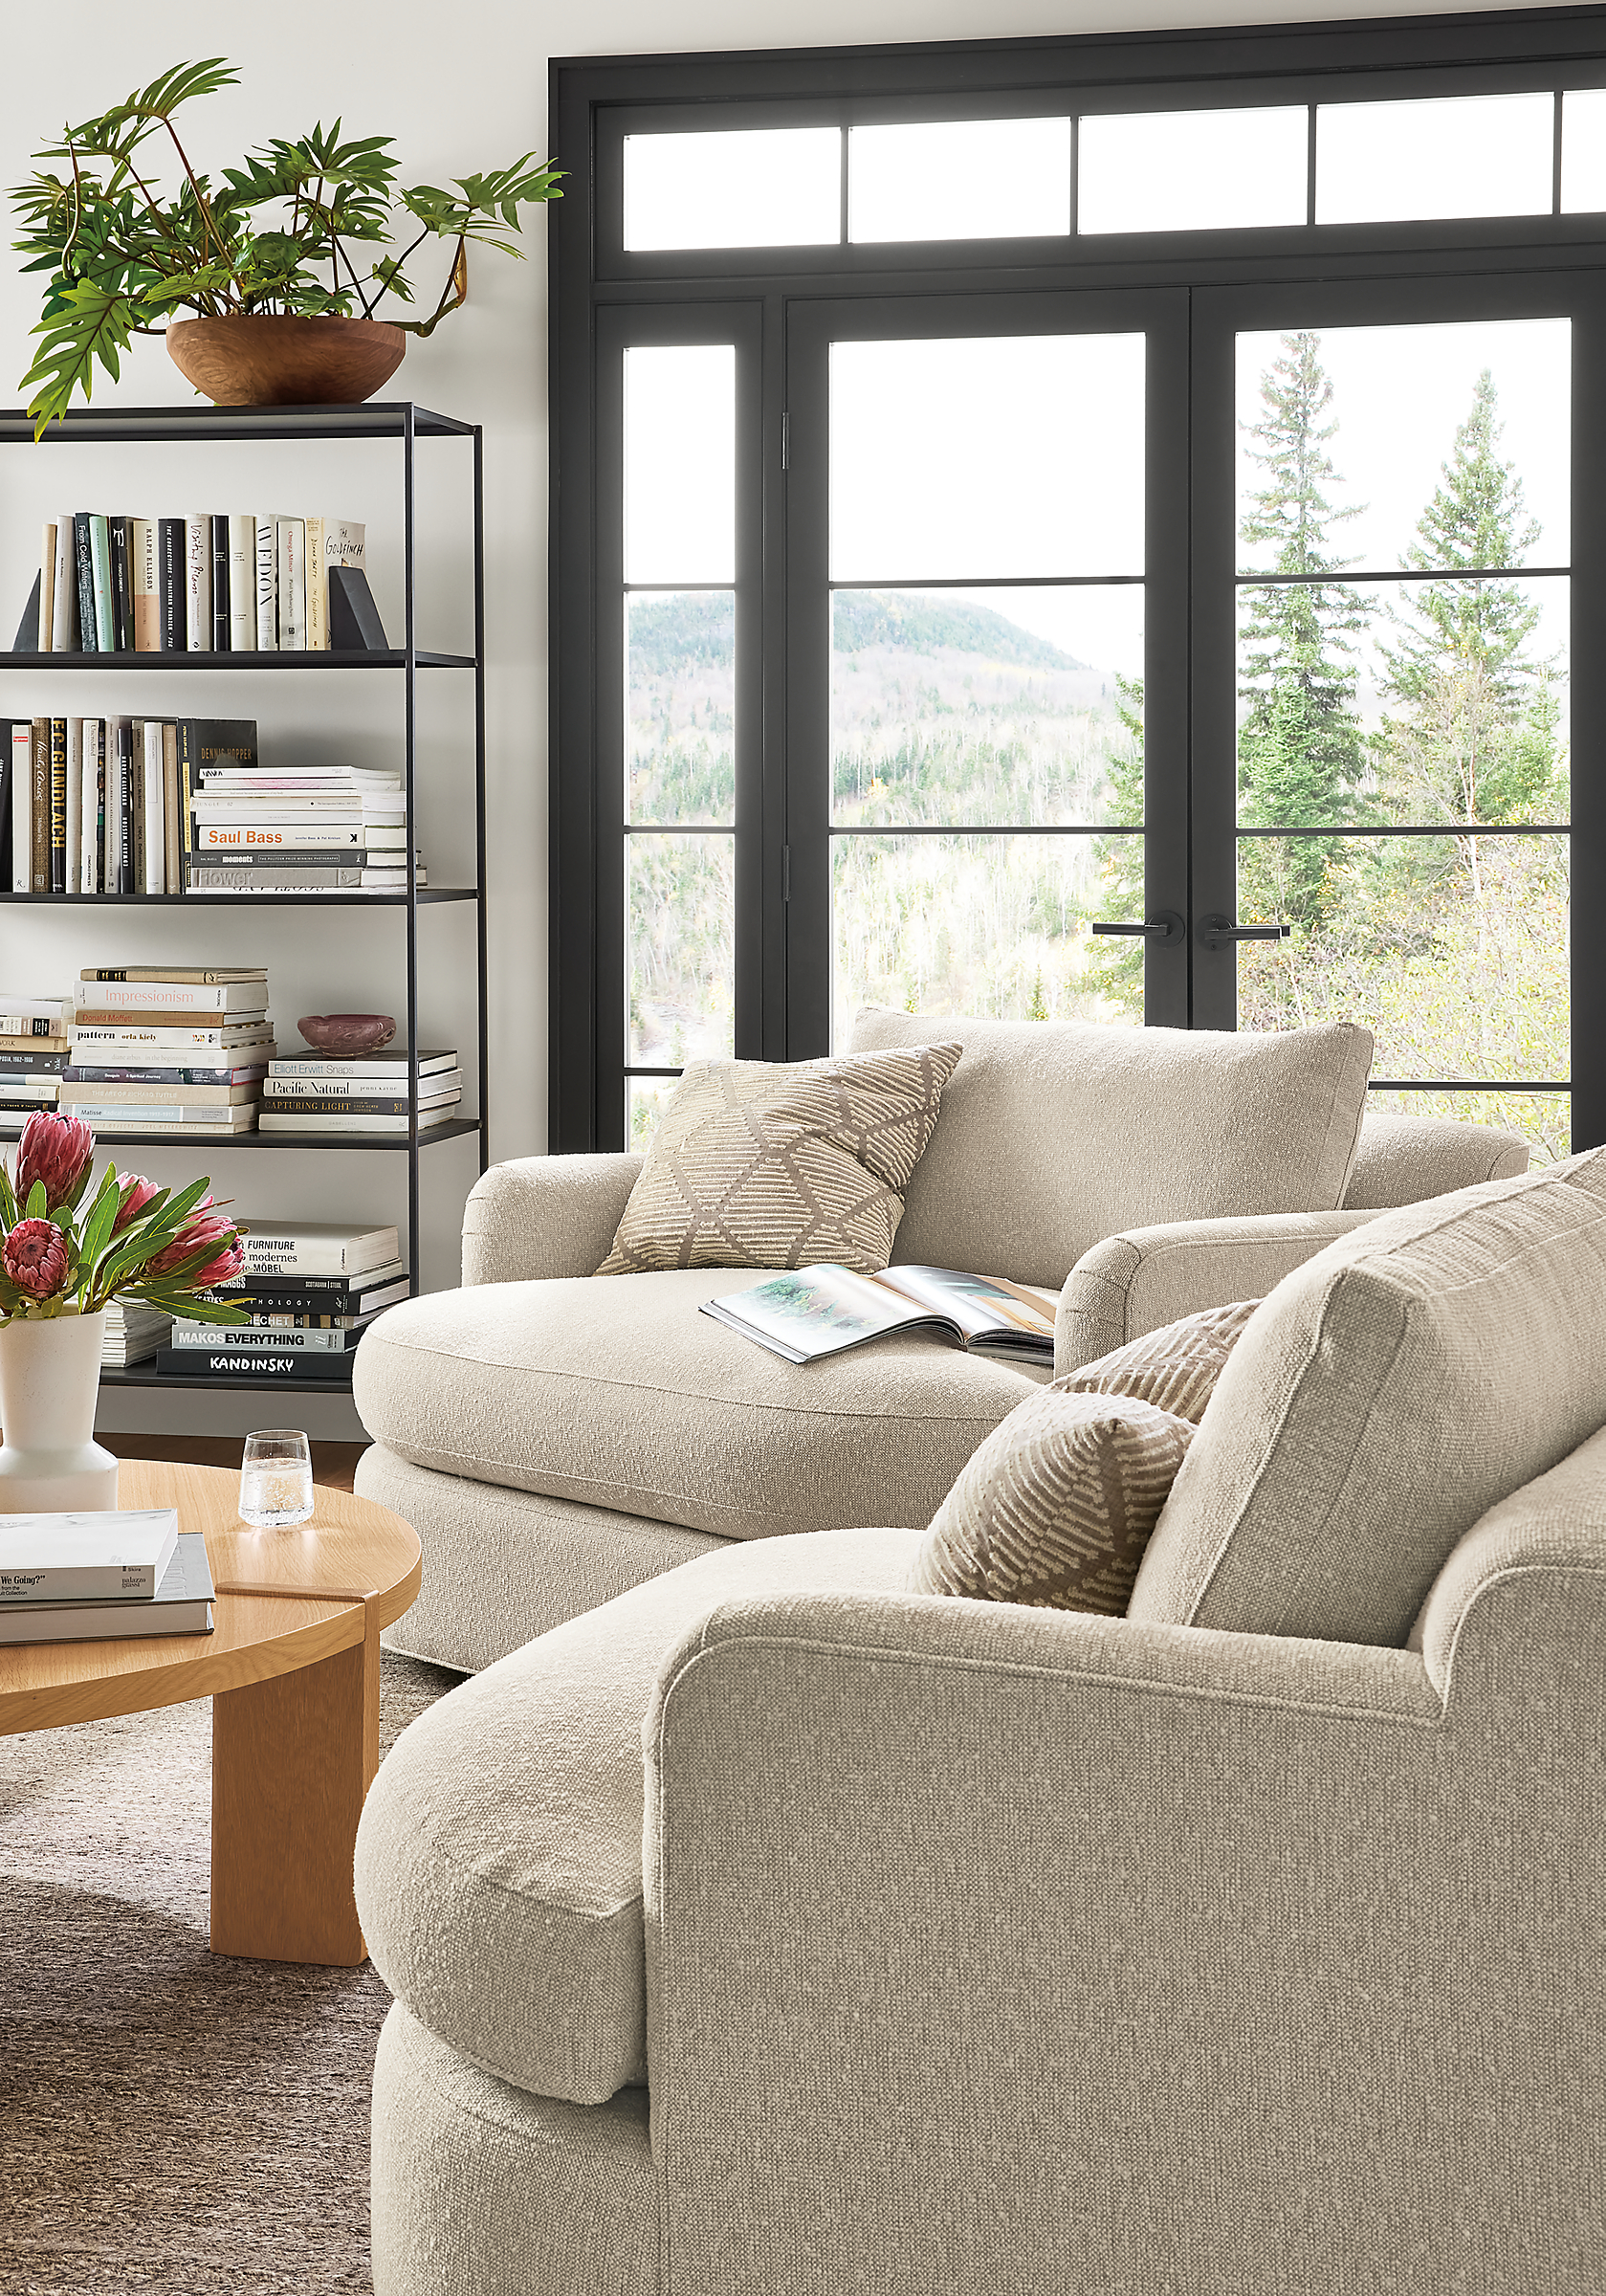 living room with Sonja Swivel Chairs in Conley Natural fabric and Hugh throw pillows in beige.